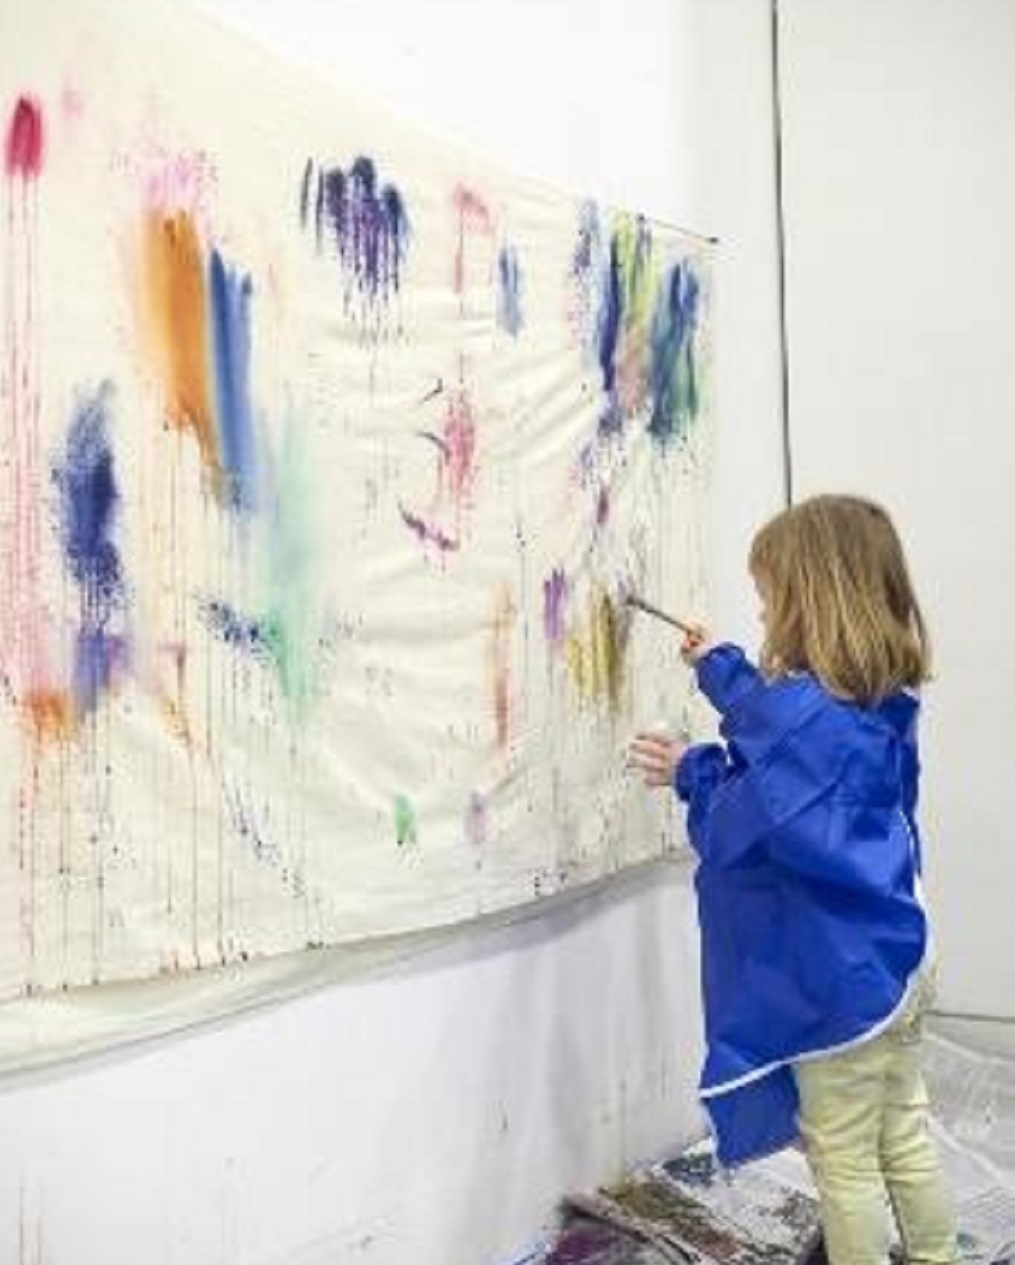 Little ones can discover there's lot of fun to be had in the art world